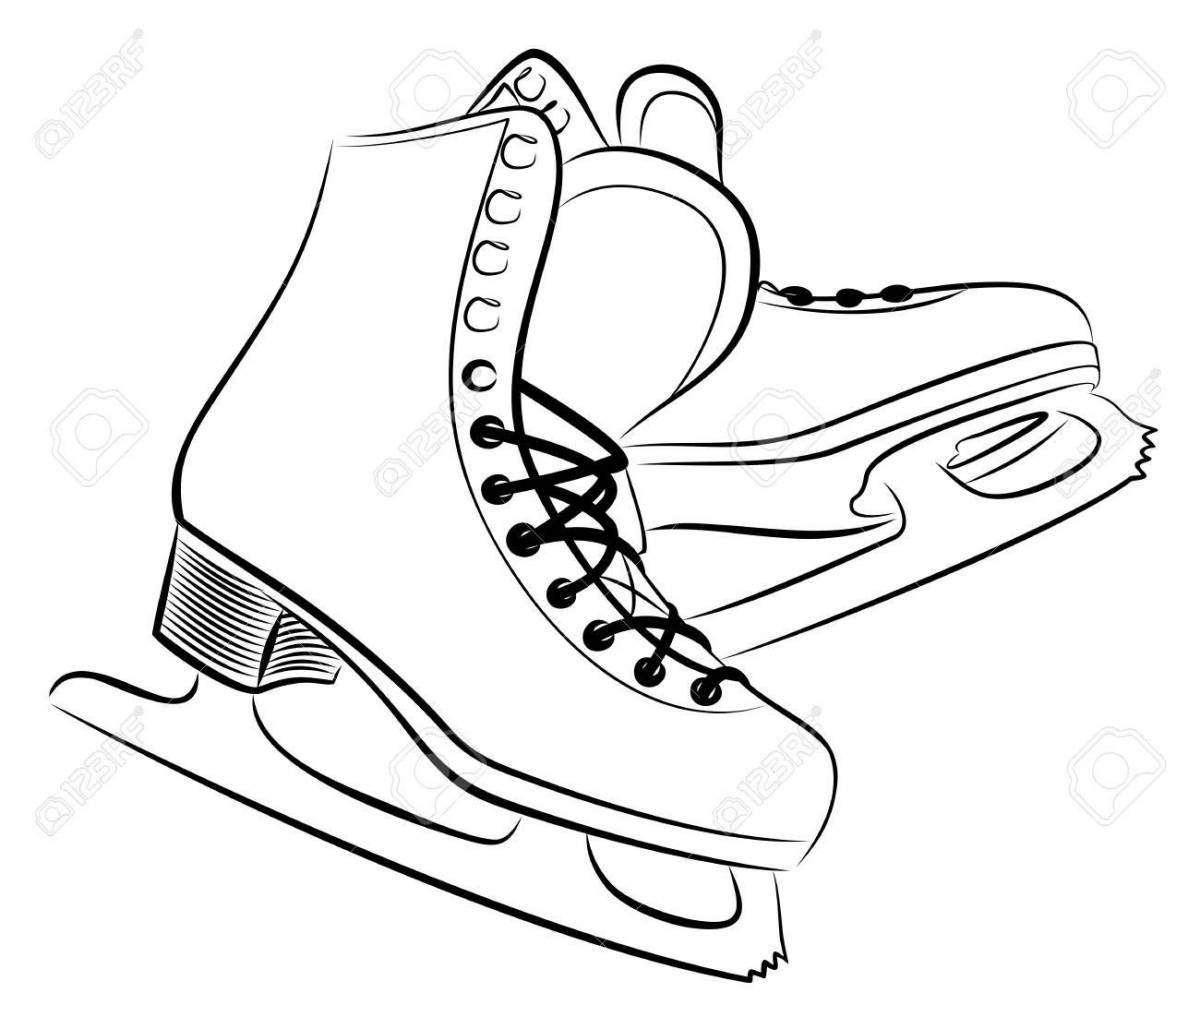 Coloring page adorable skate